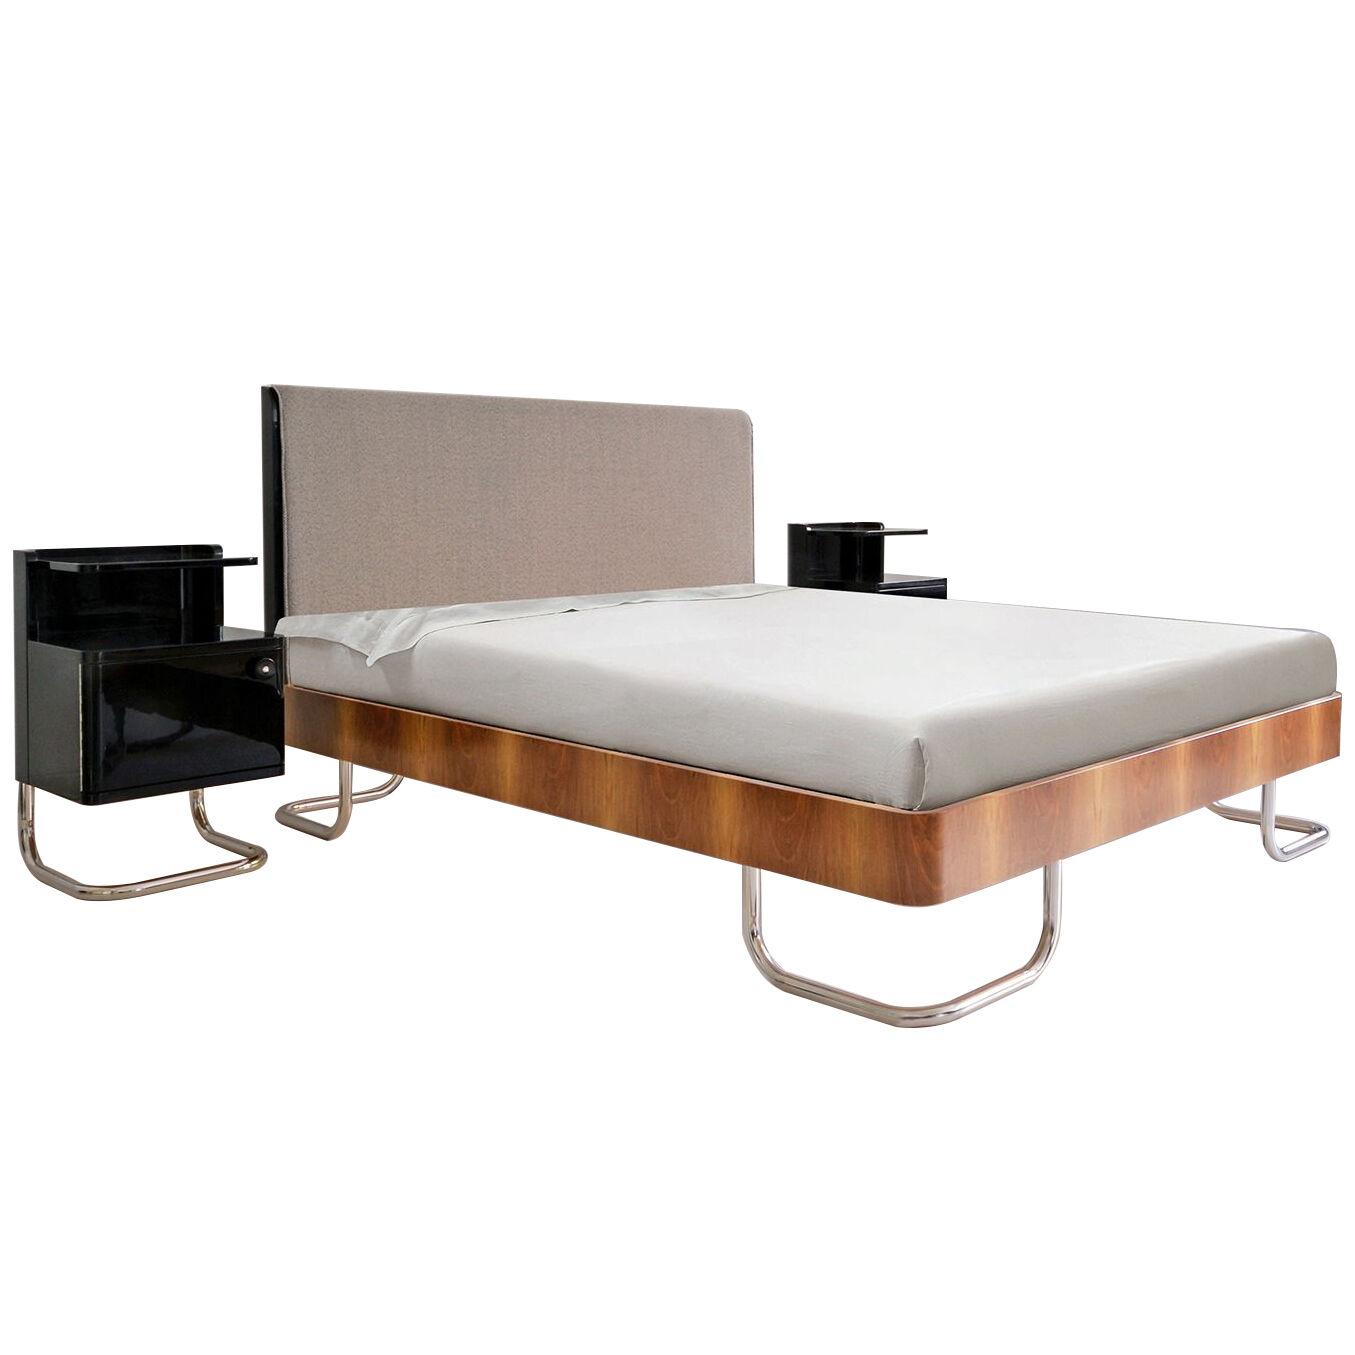 Modern contemporary customizable double bed with bedside cabinets